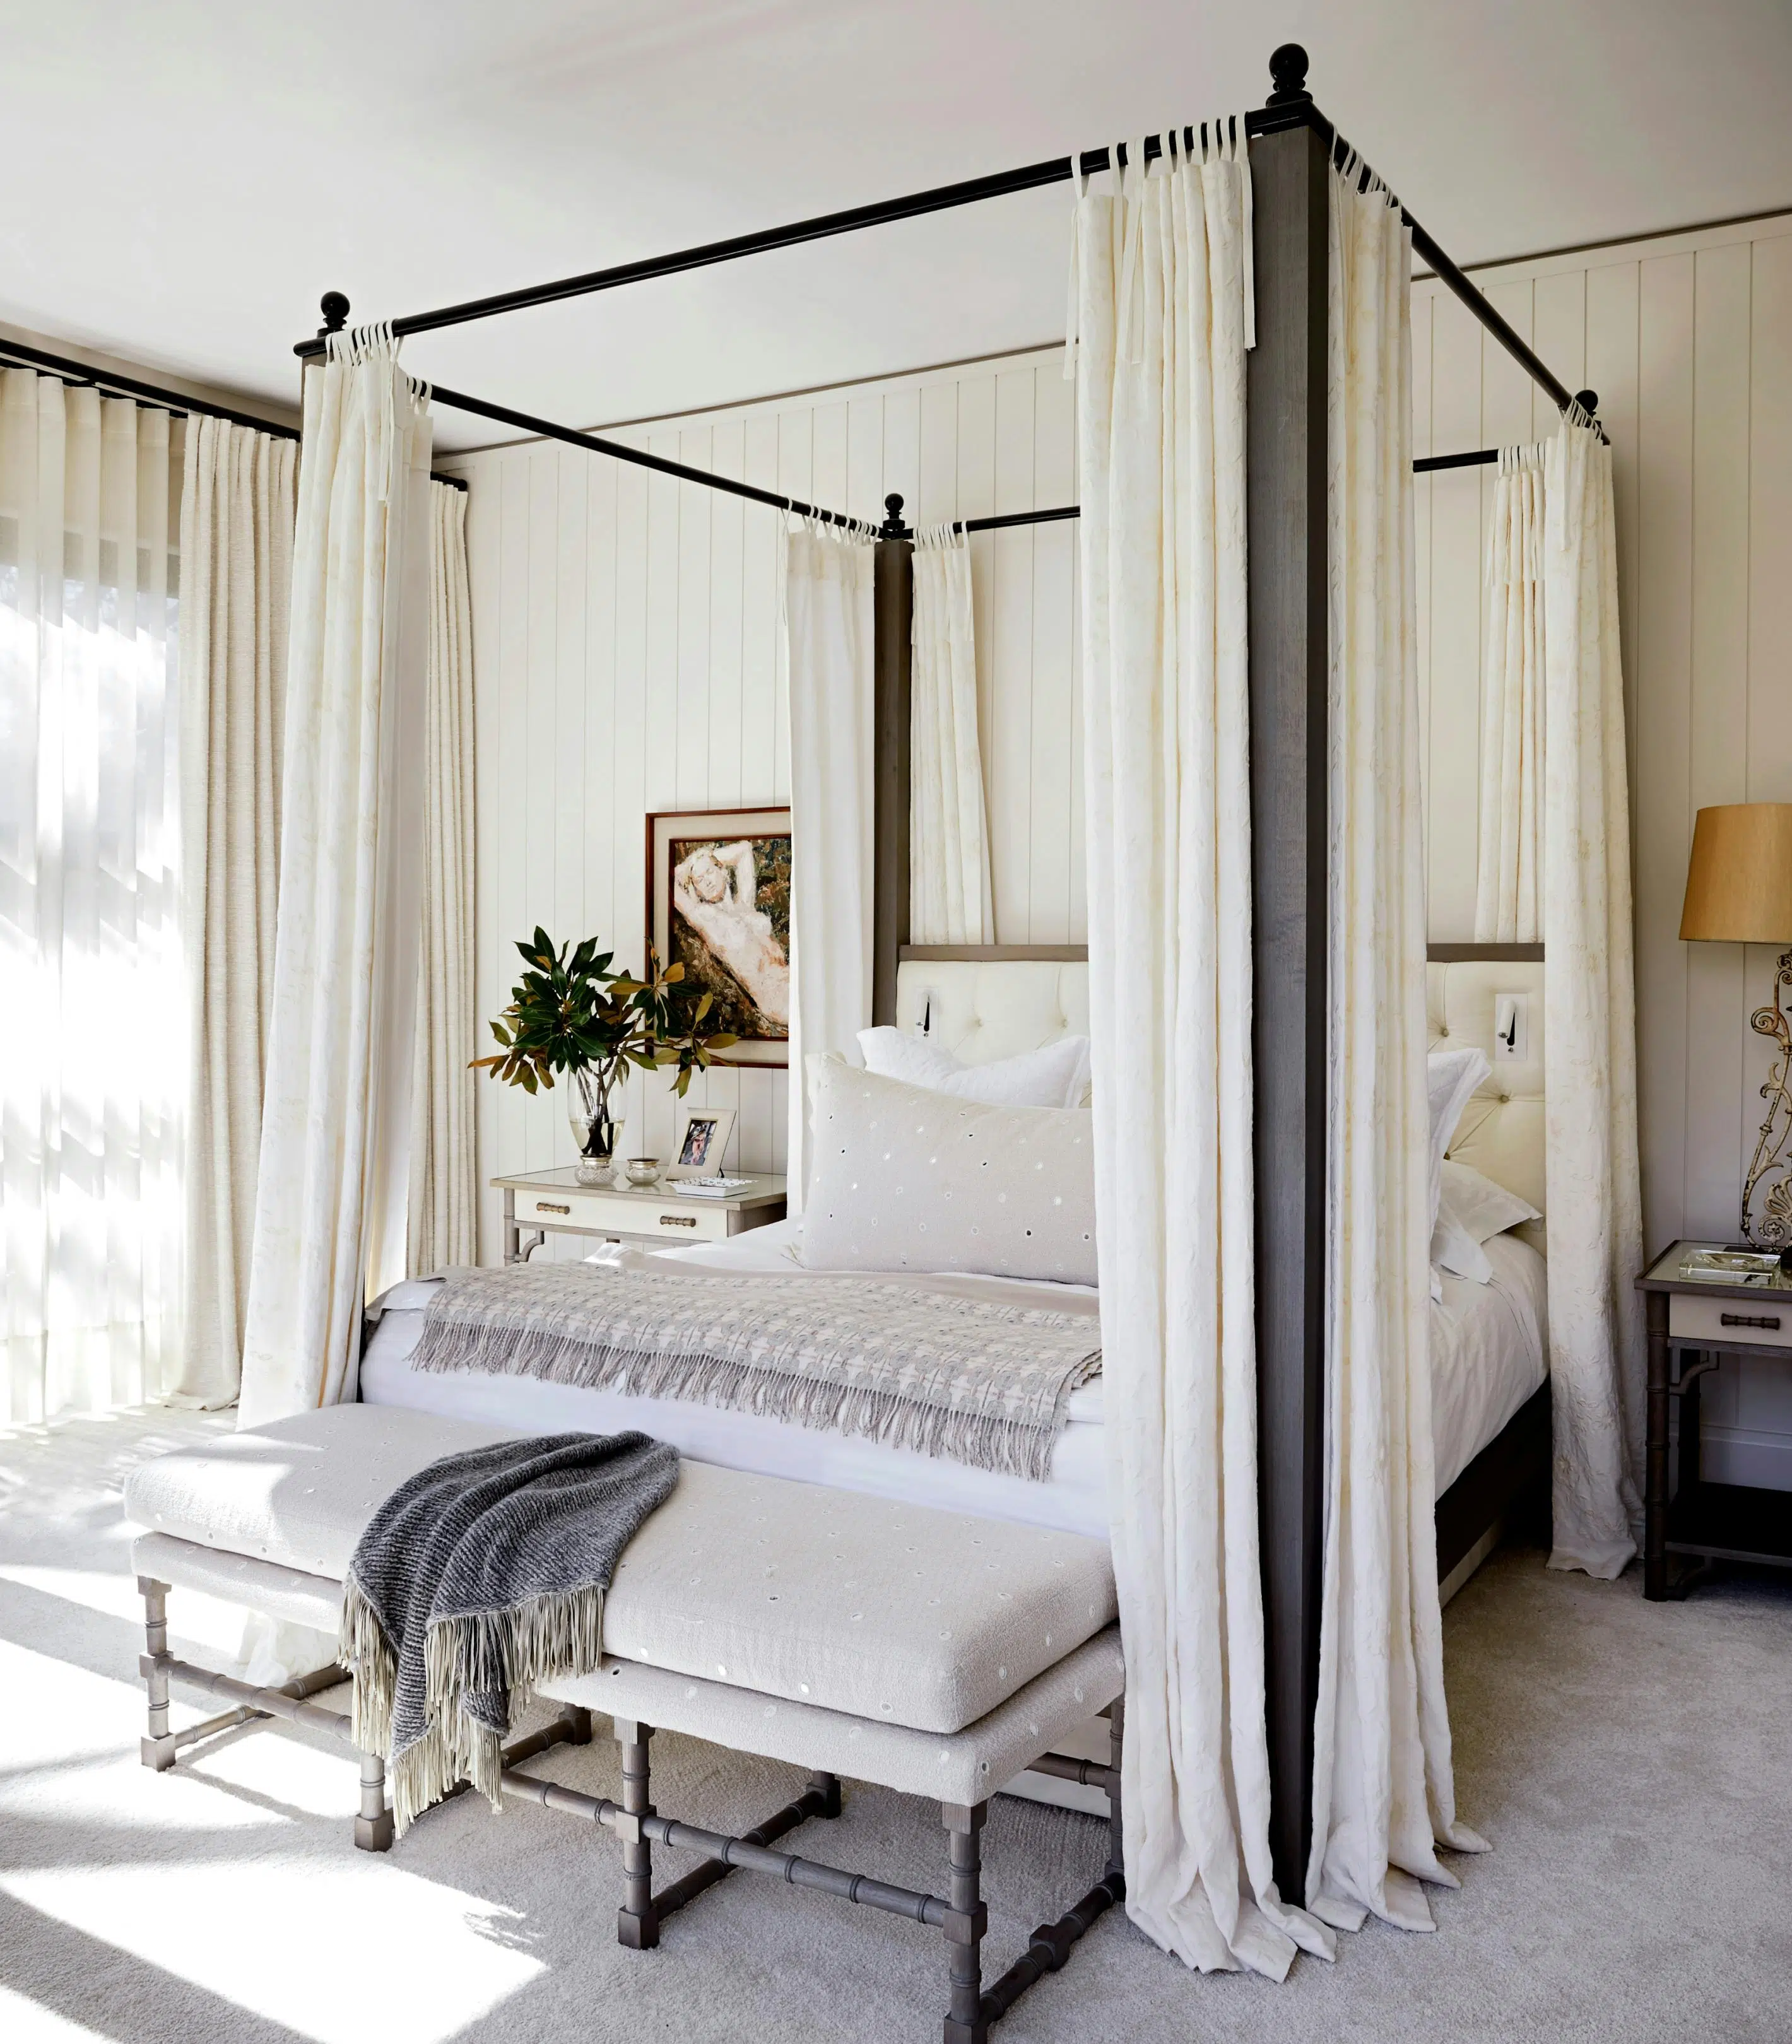 A bedroom that features a sophisticated 4-poster bed in a neutral colour palette of whites and greys with an ottoman just in front of the bed.